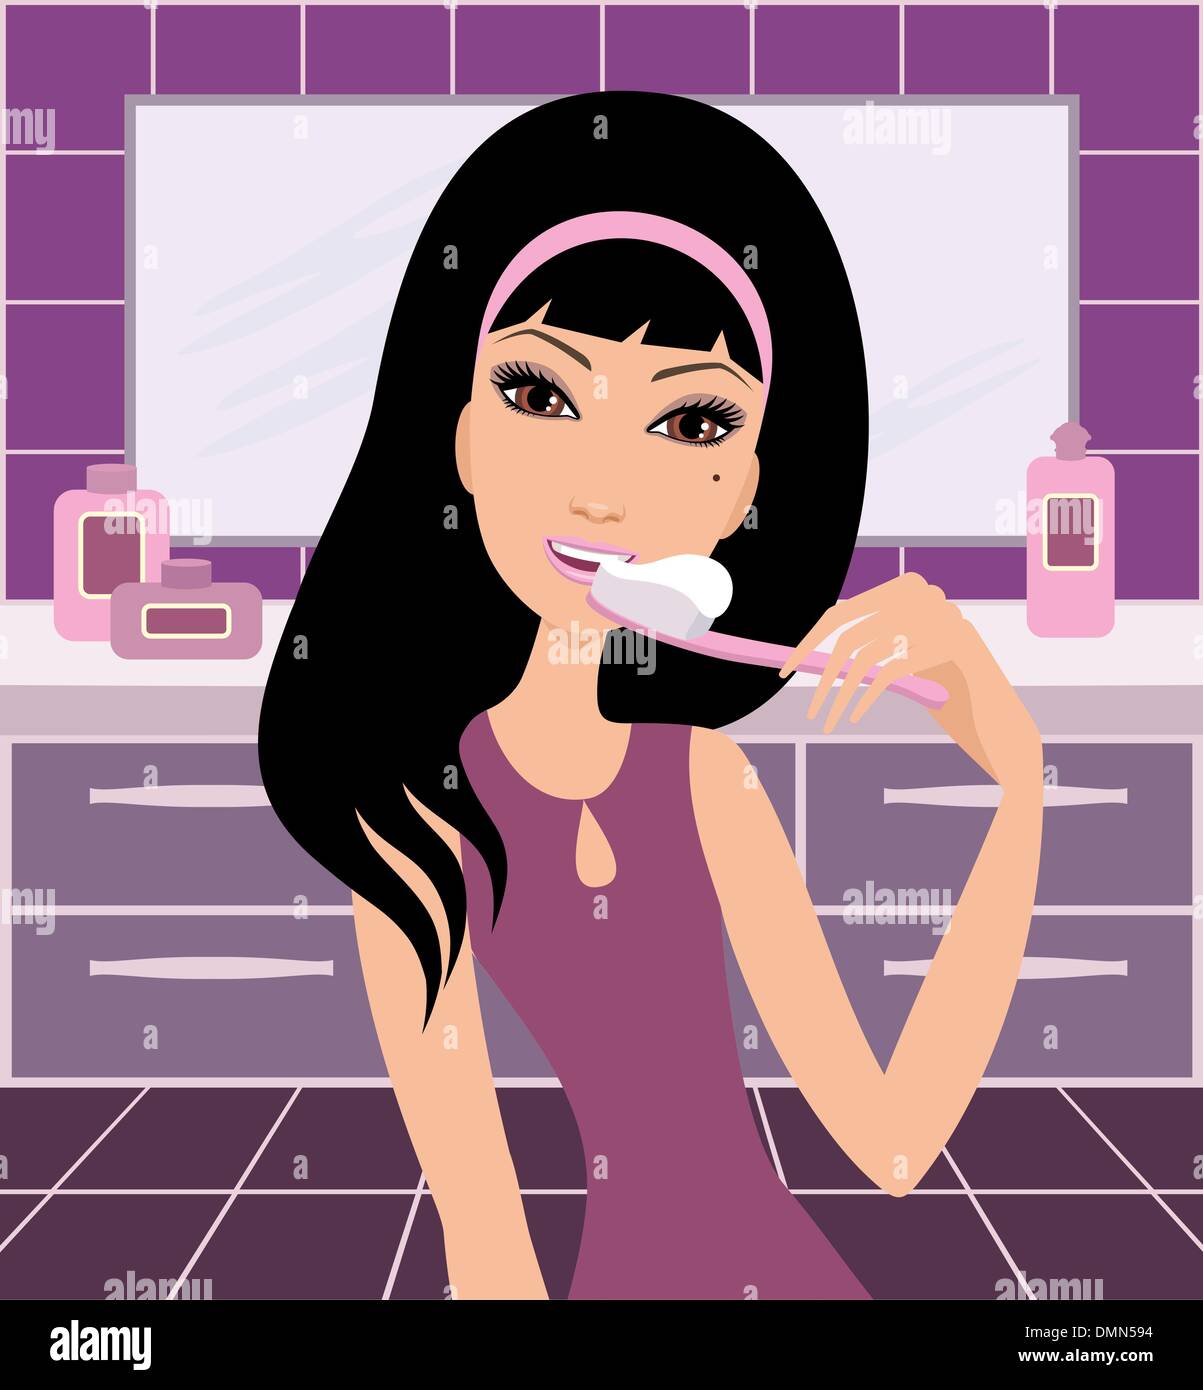 Young woman brushes teeth Stock Vector